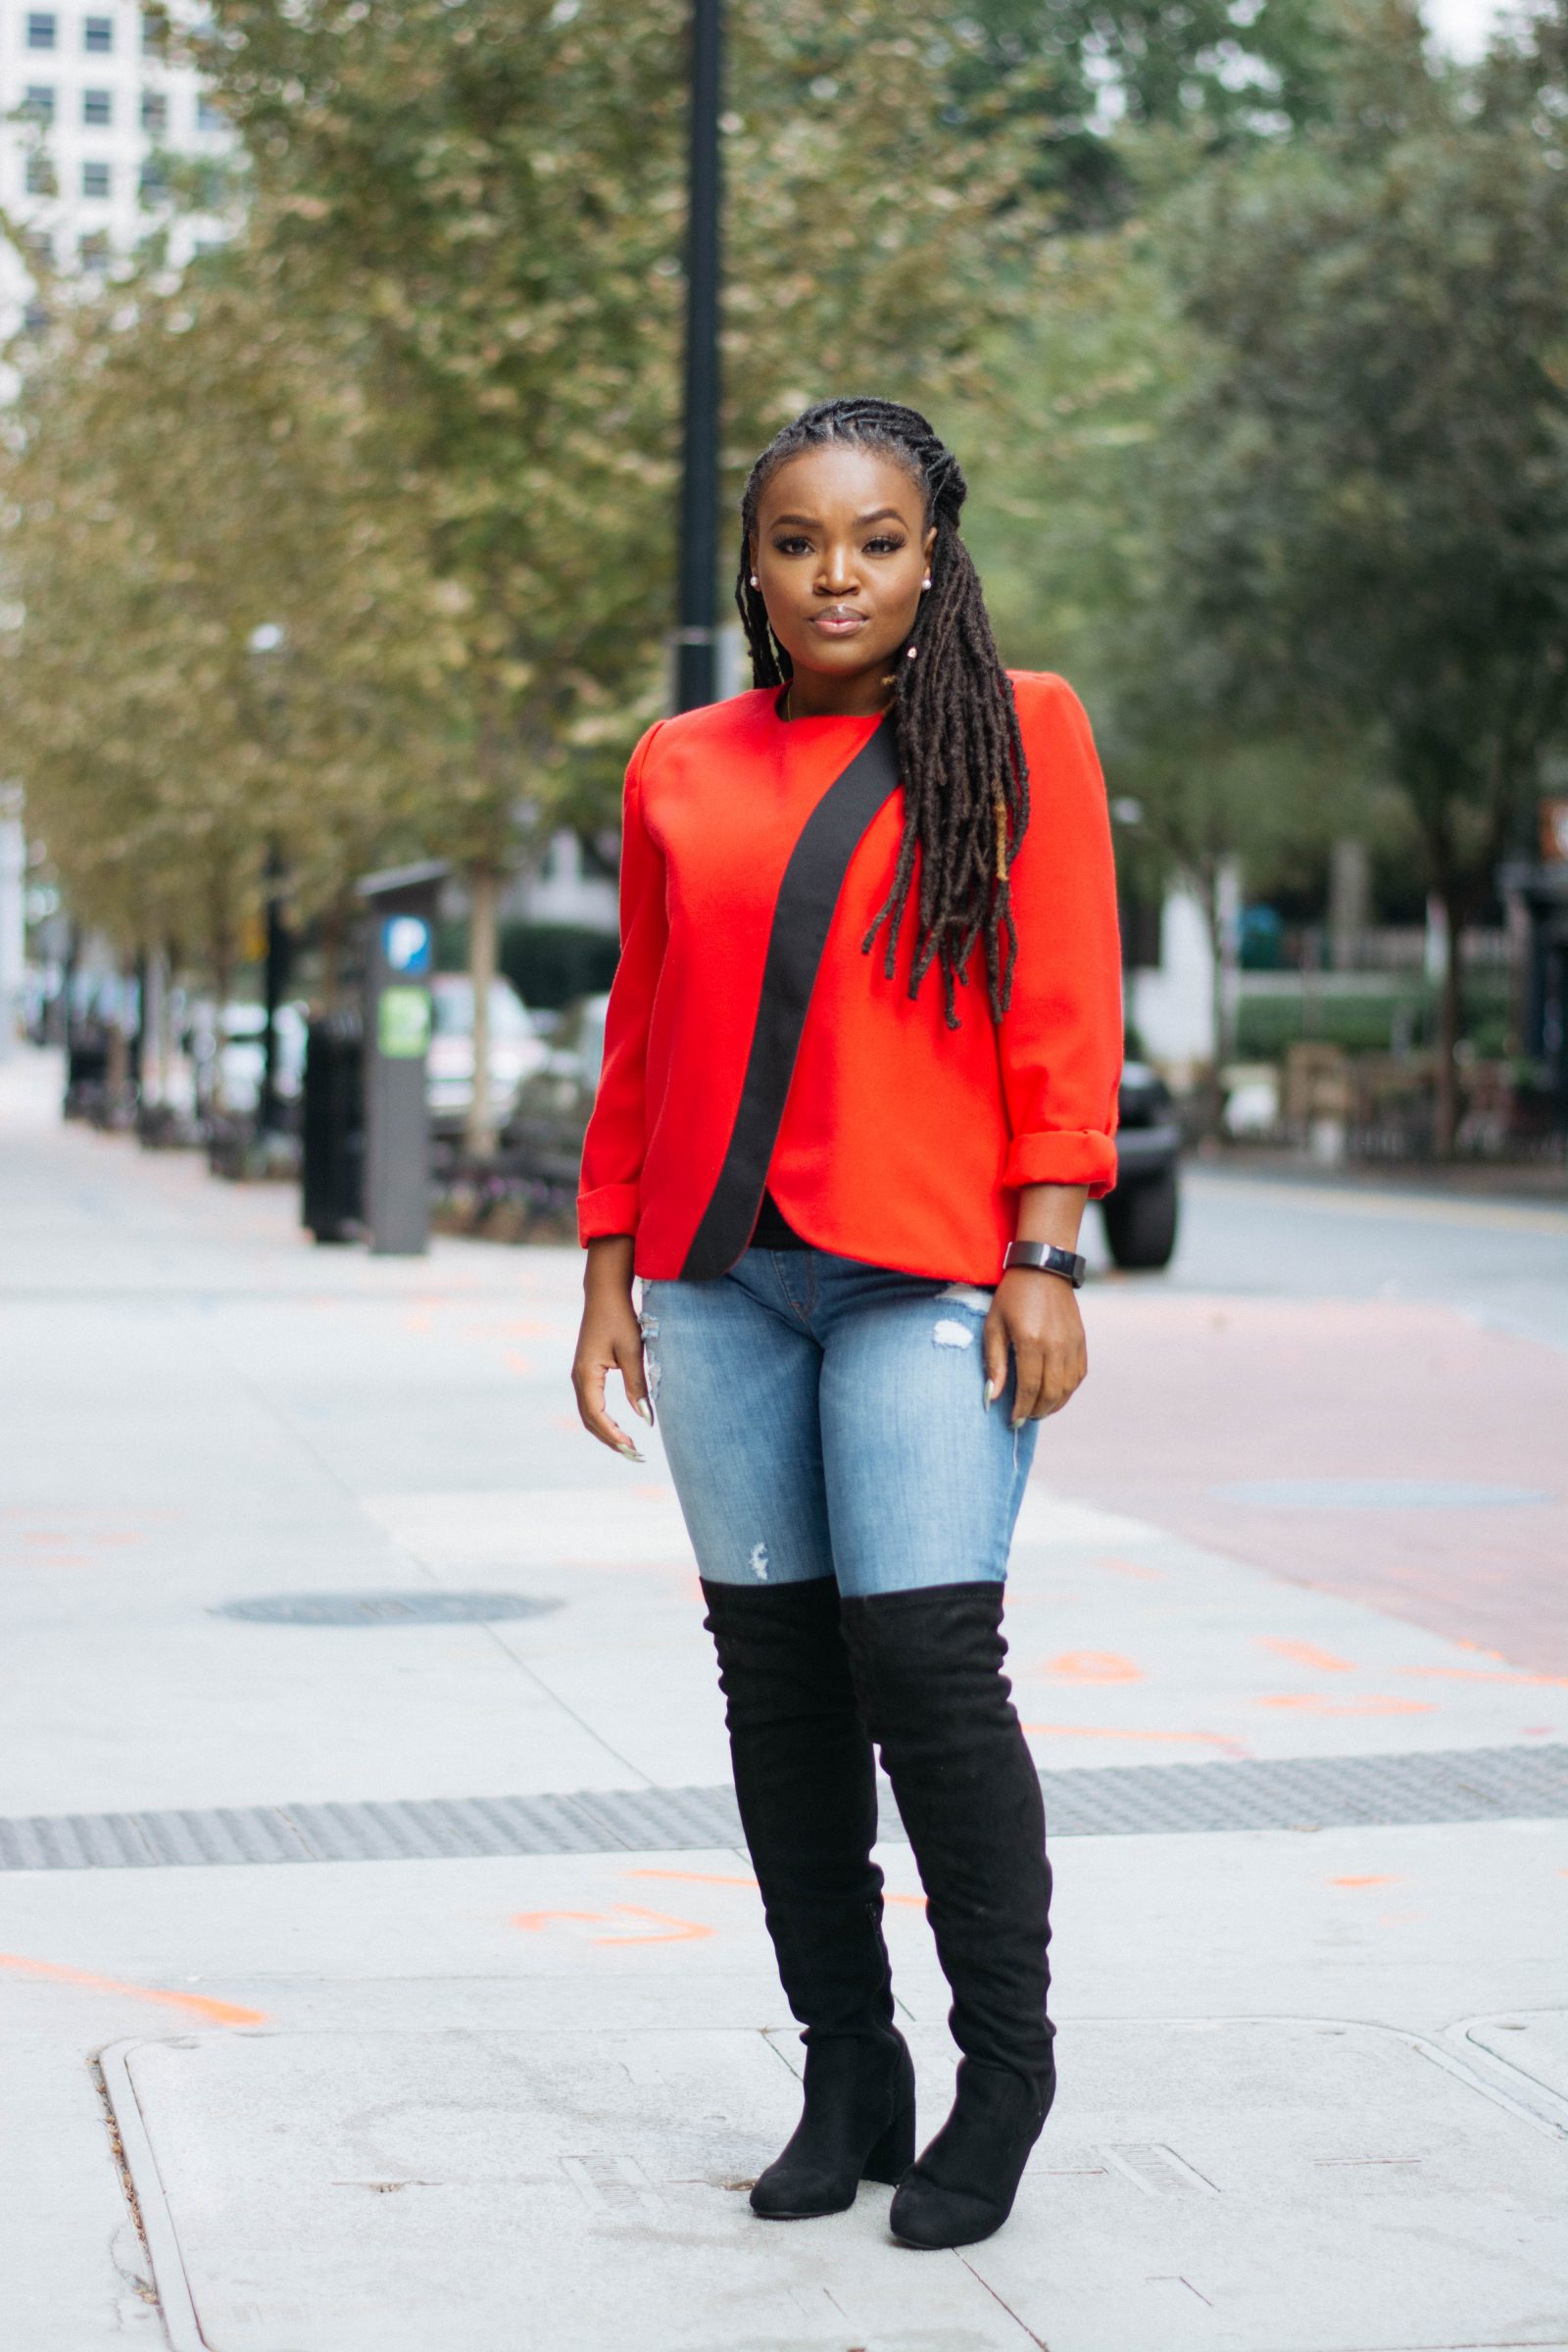 SUNDAY FALL BRUNCH DATE CASUAL OUTFIT